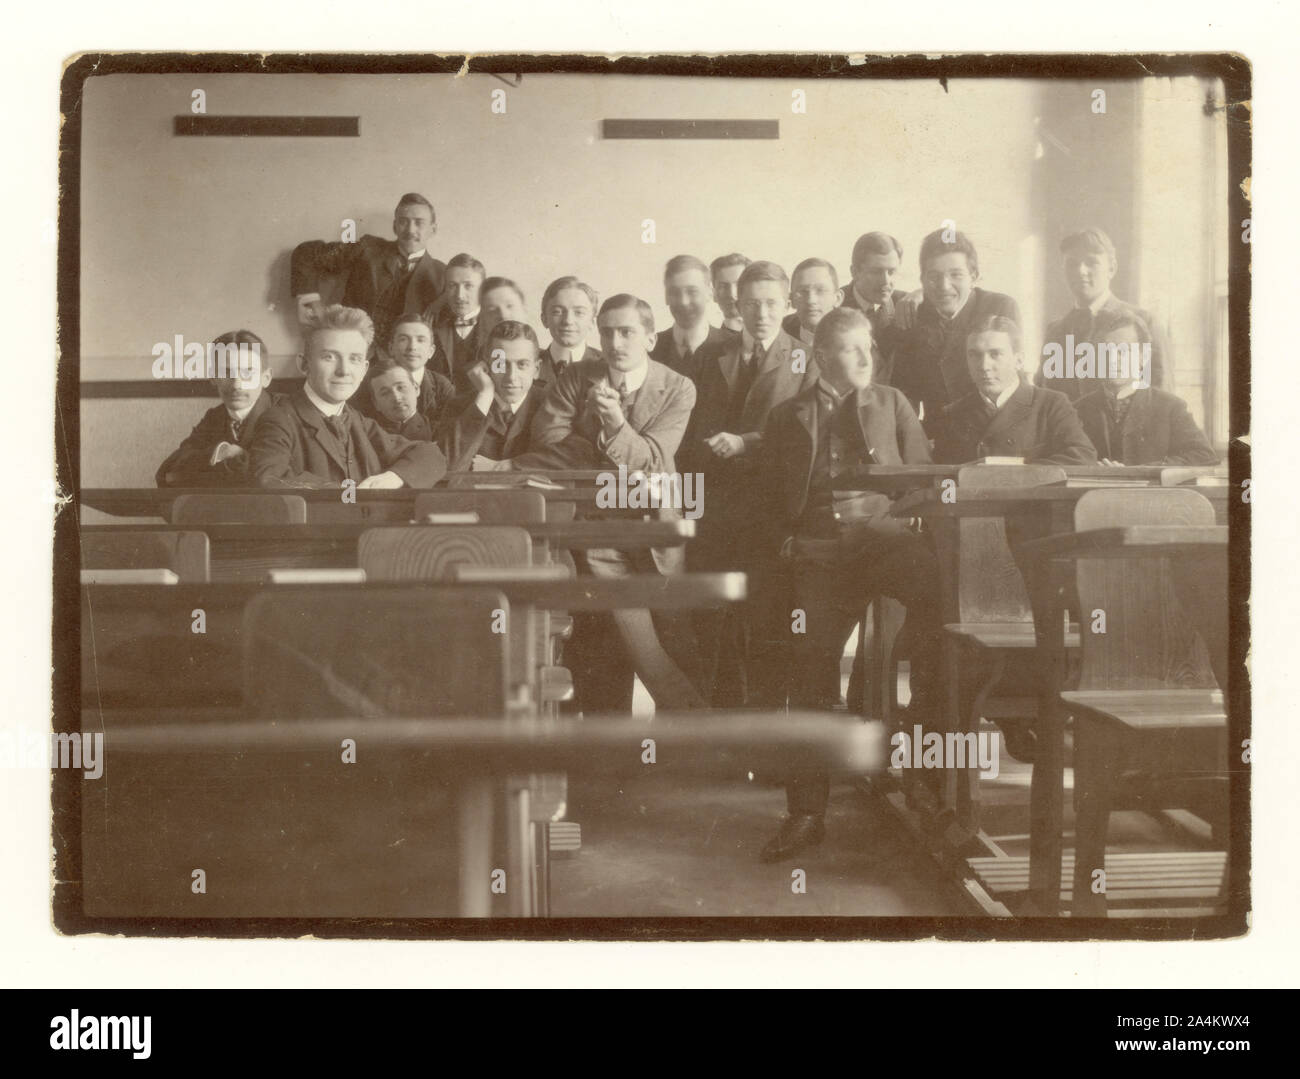 Early 1900's photo of happy young men, students in classroom possibly at a German university, one of the students is English, the rest have German names. circa 1910. Stock Photo